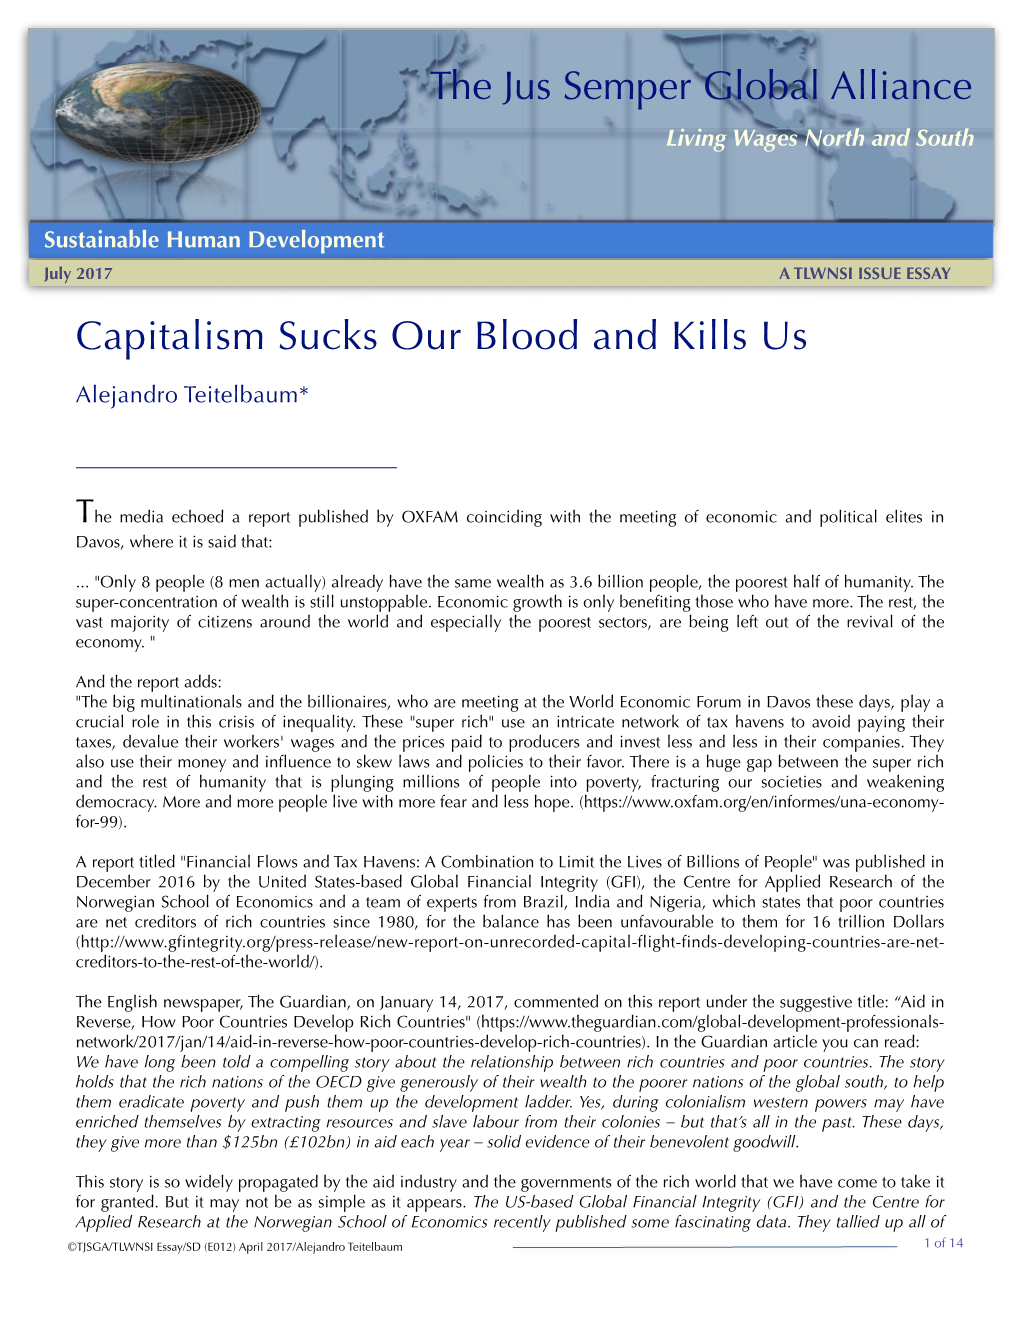 Capitalism Sucks Our Blood and Kills Us the Jus Semper Global Alliance